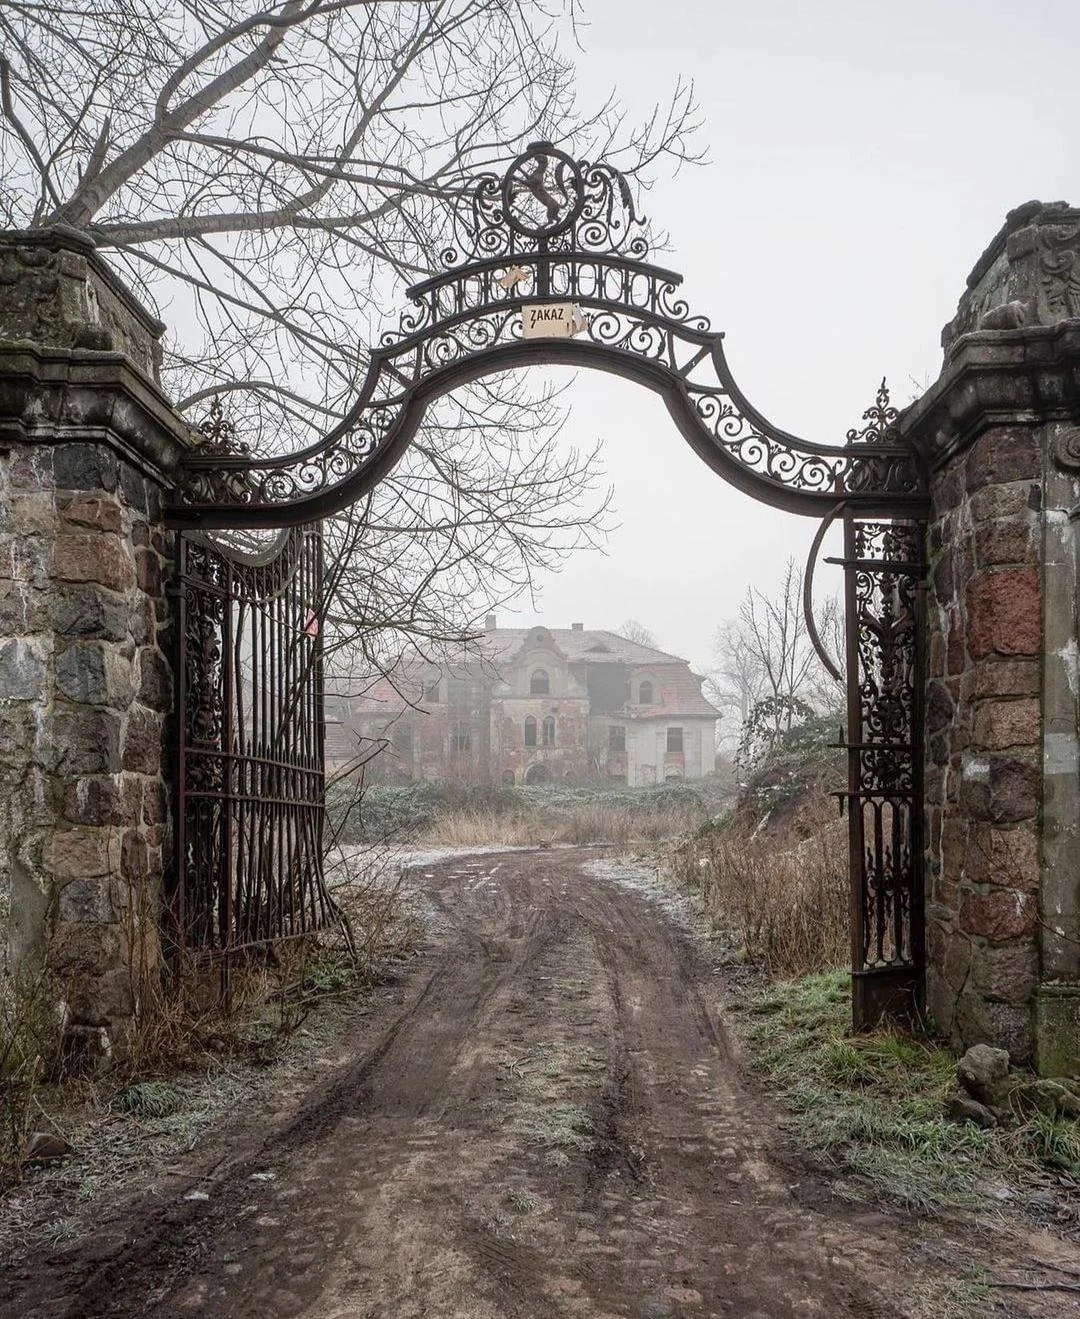 An abandoned mansion in the fog with an old gate entrance